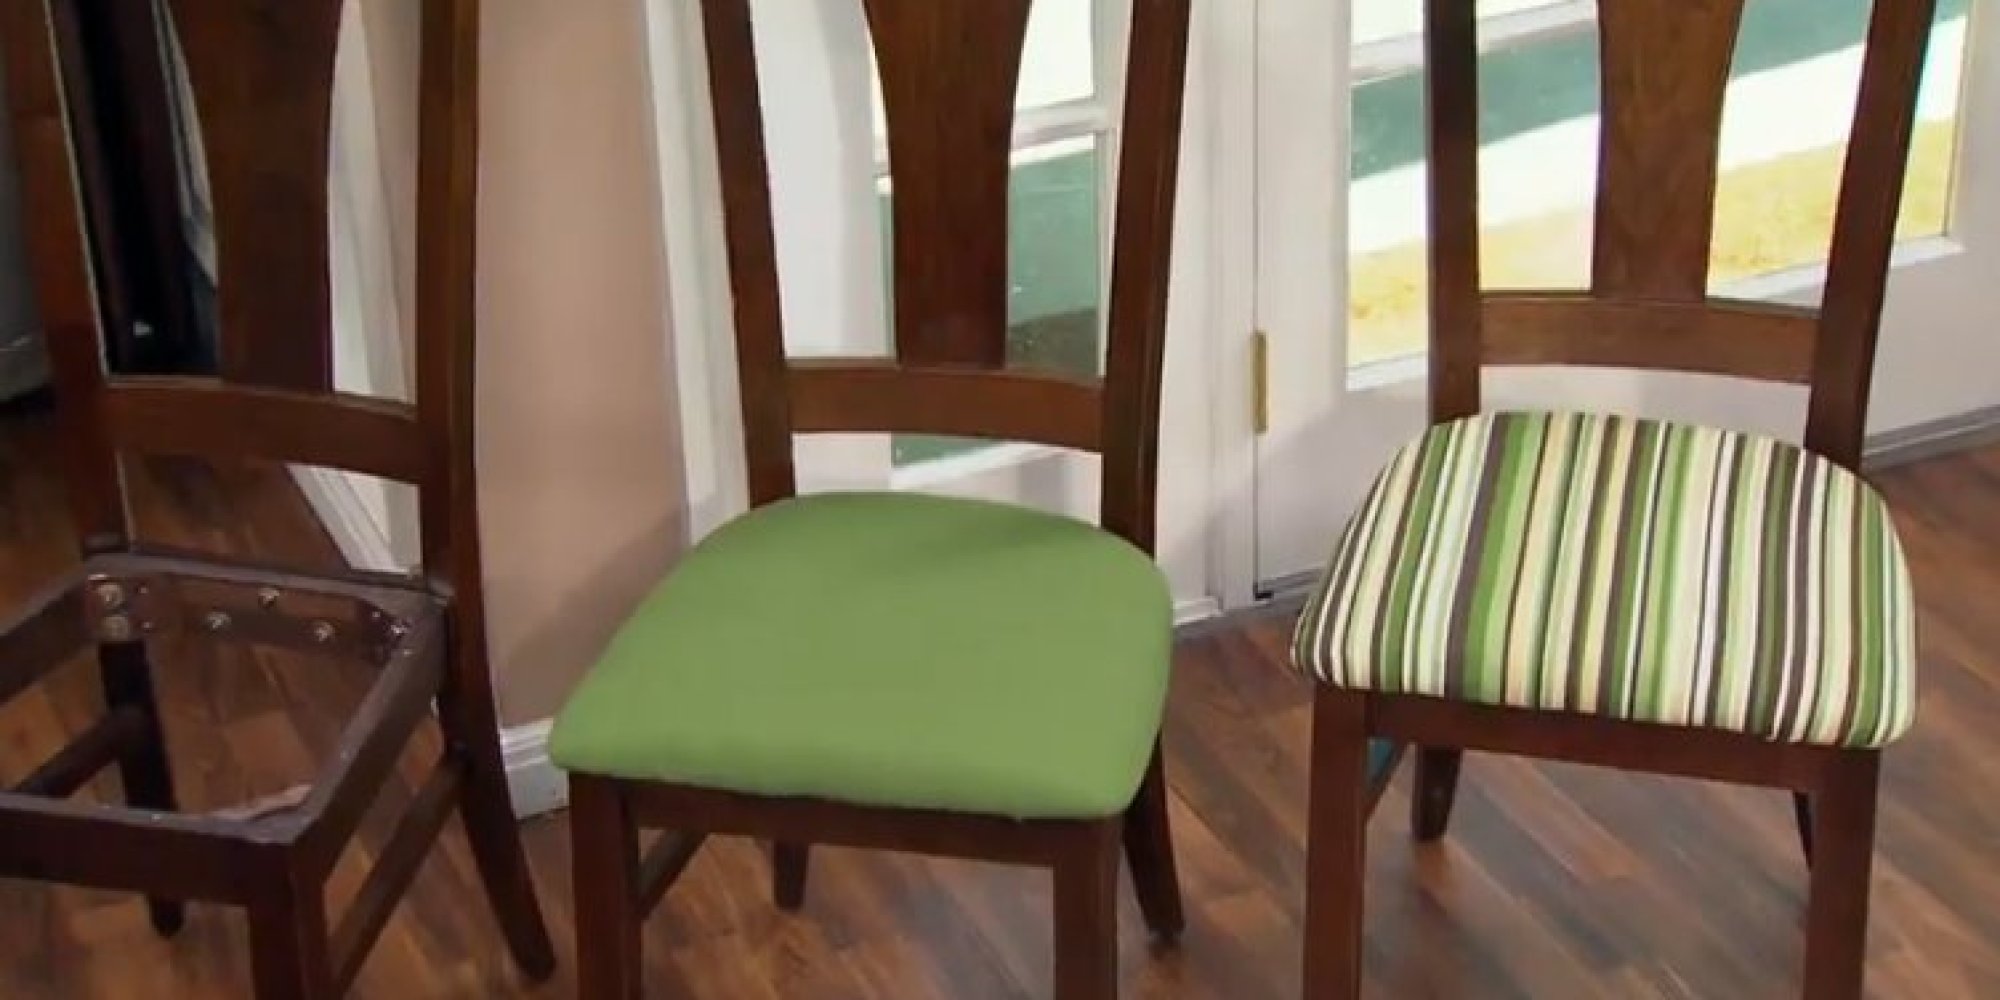 covering ugly dining room chairs